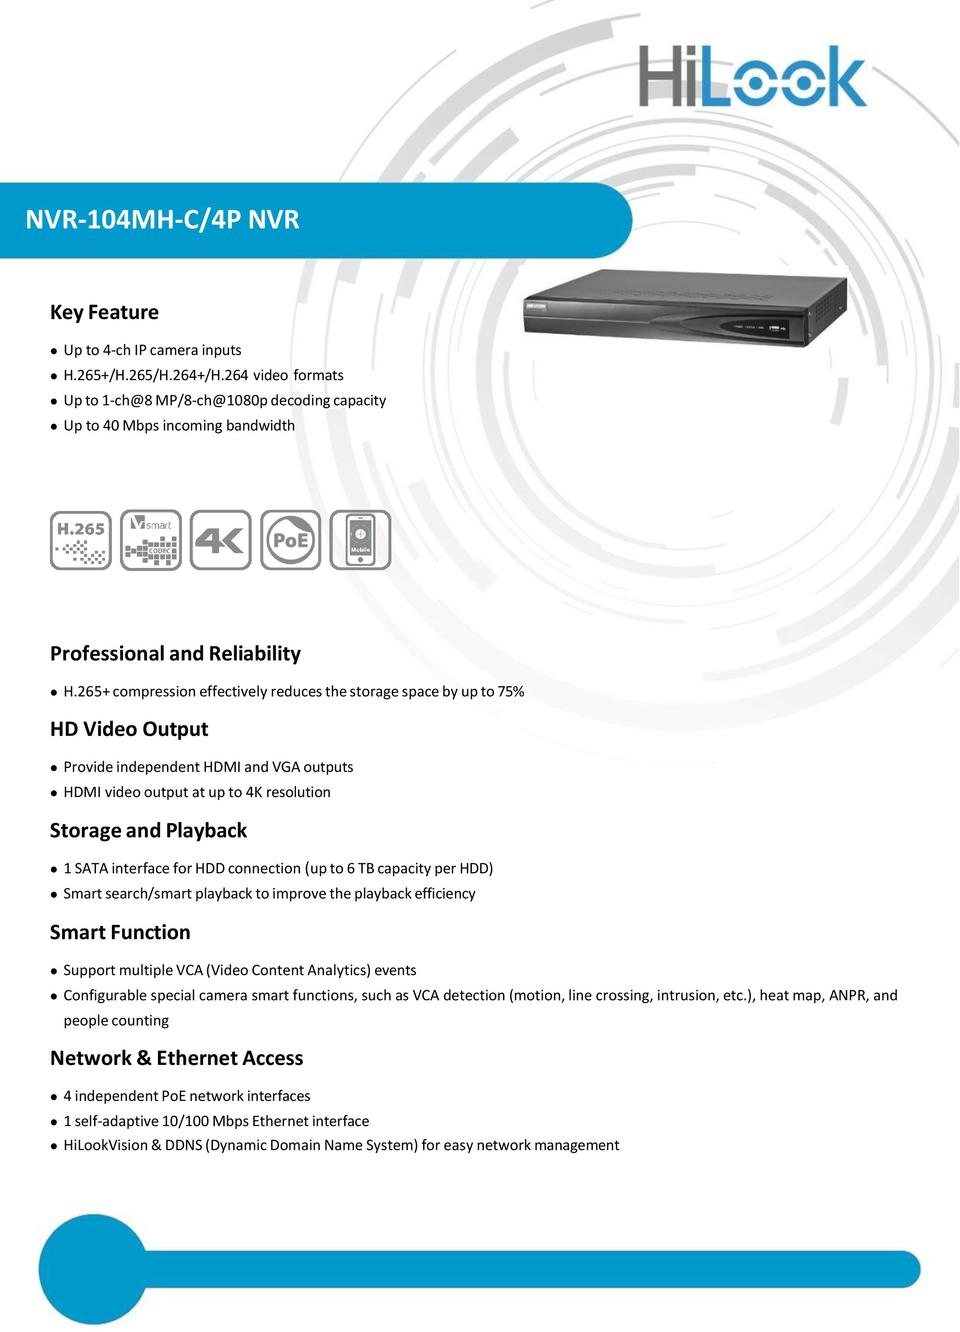 HiLook NVR-104MH-C/4P 4CH C Series NVR with 3TB HDD 0